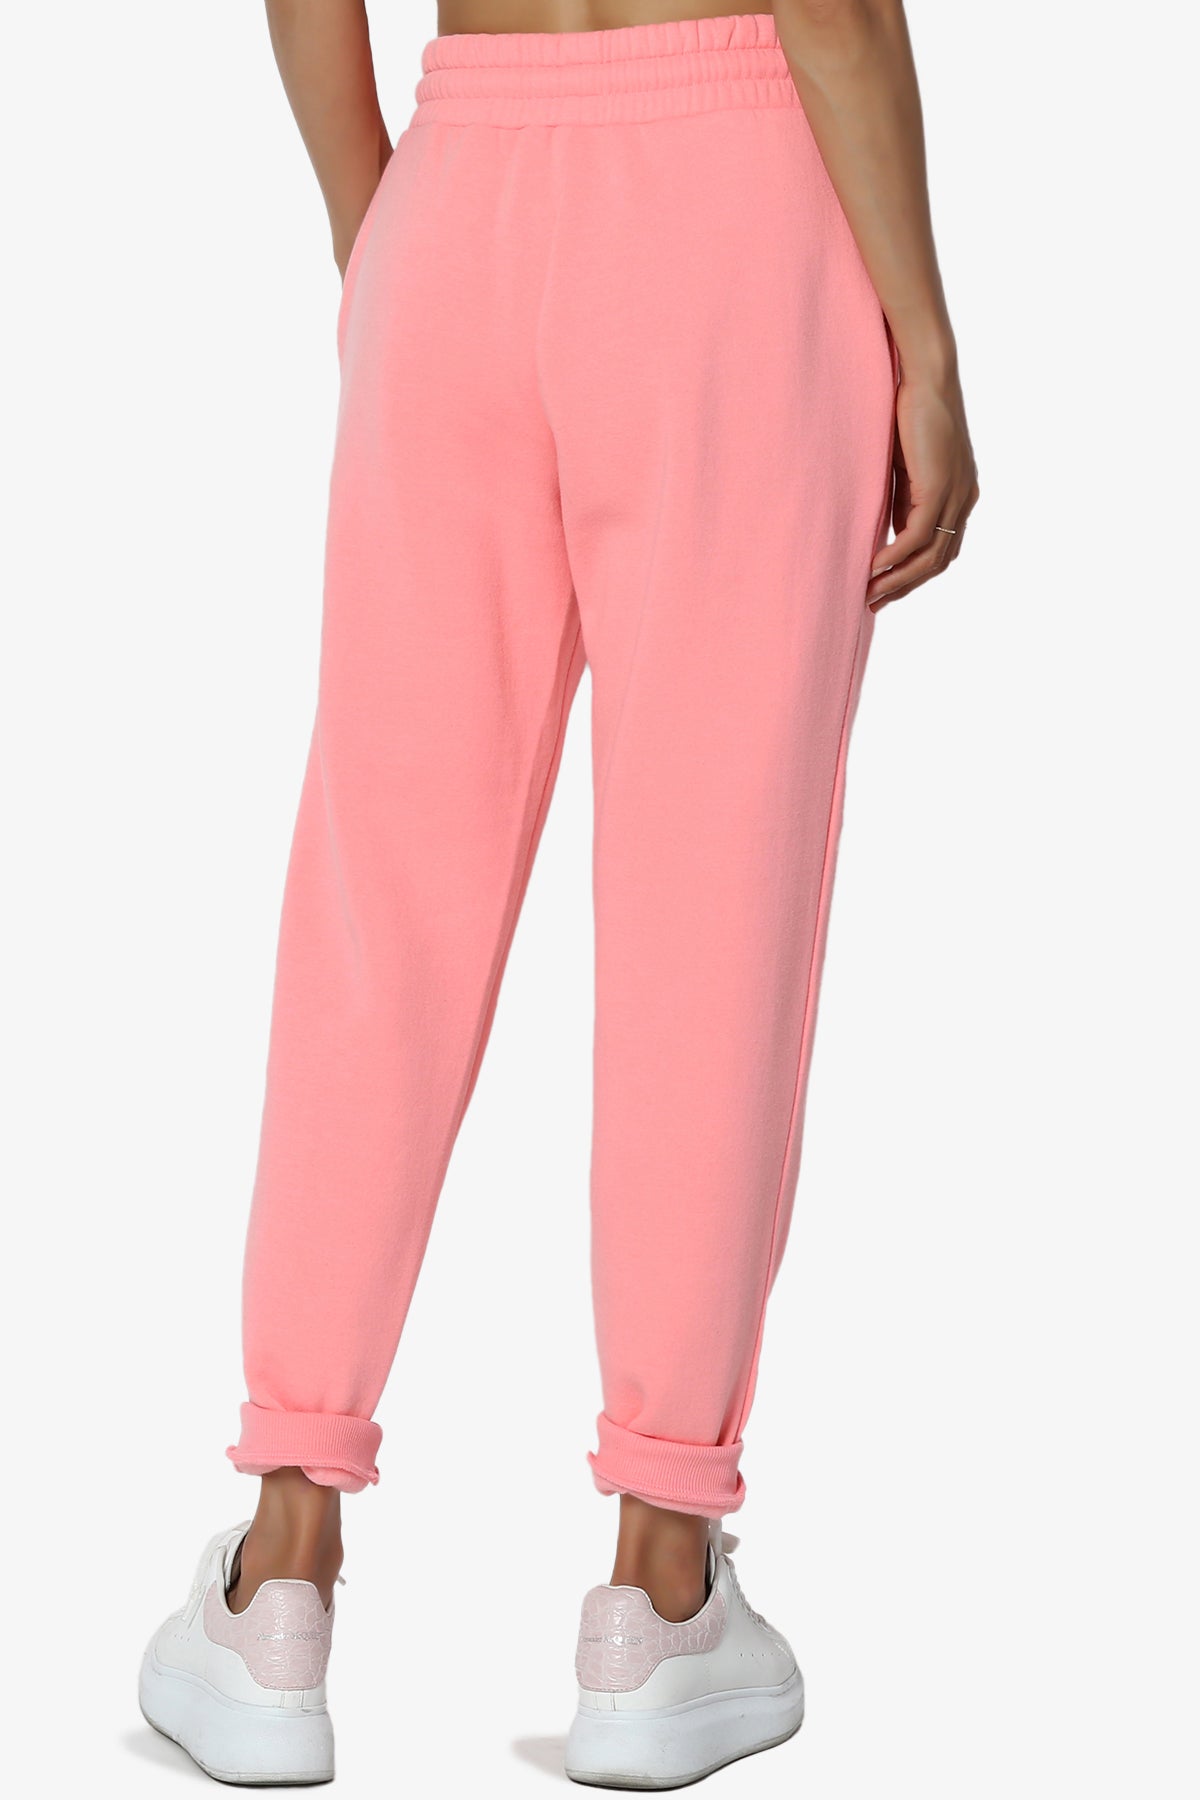 VISALY Cropped Pants for Women Casual Petite Joggers Lounge with Pockets  Pants Womens Waisted Athletic Sweatpants, Pink, Medium : :  Clothing, Shoes & Accessories